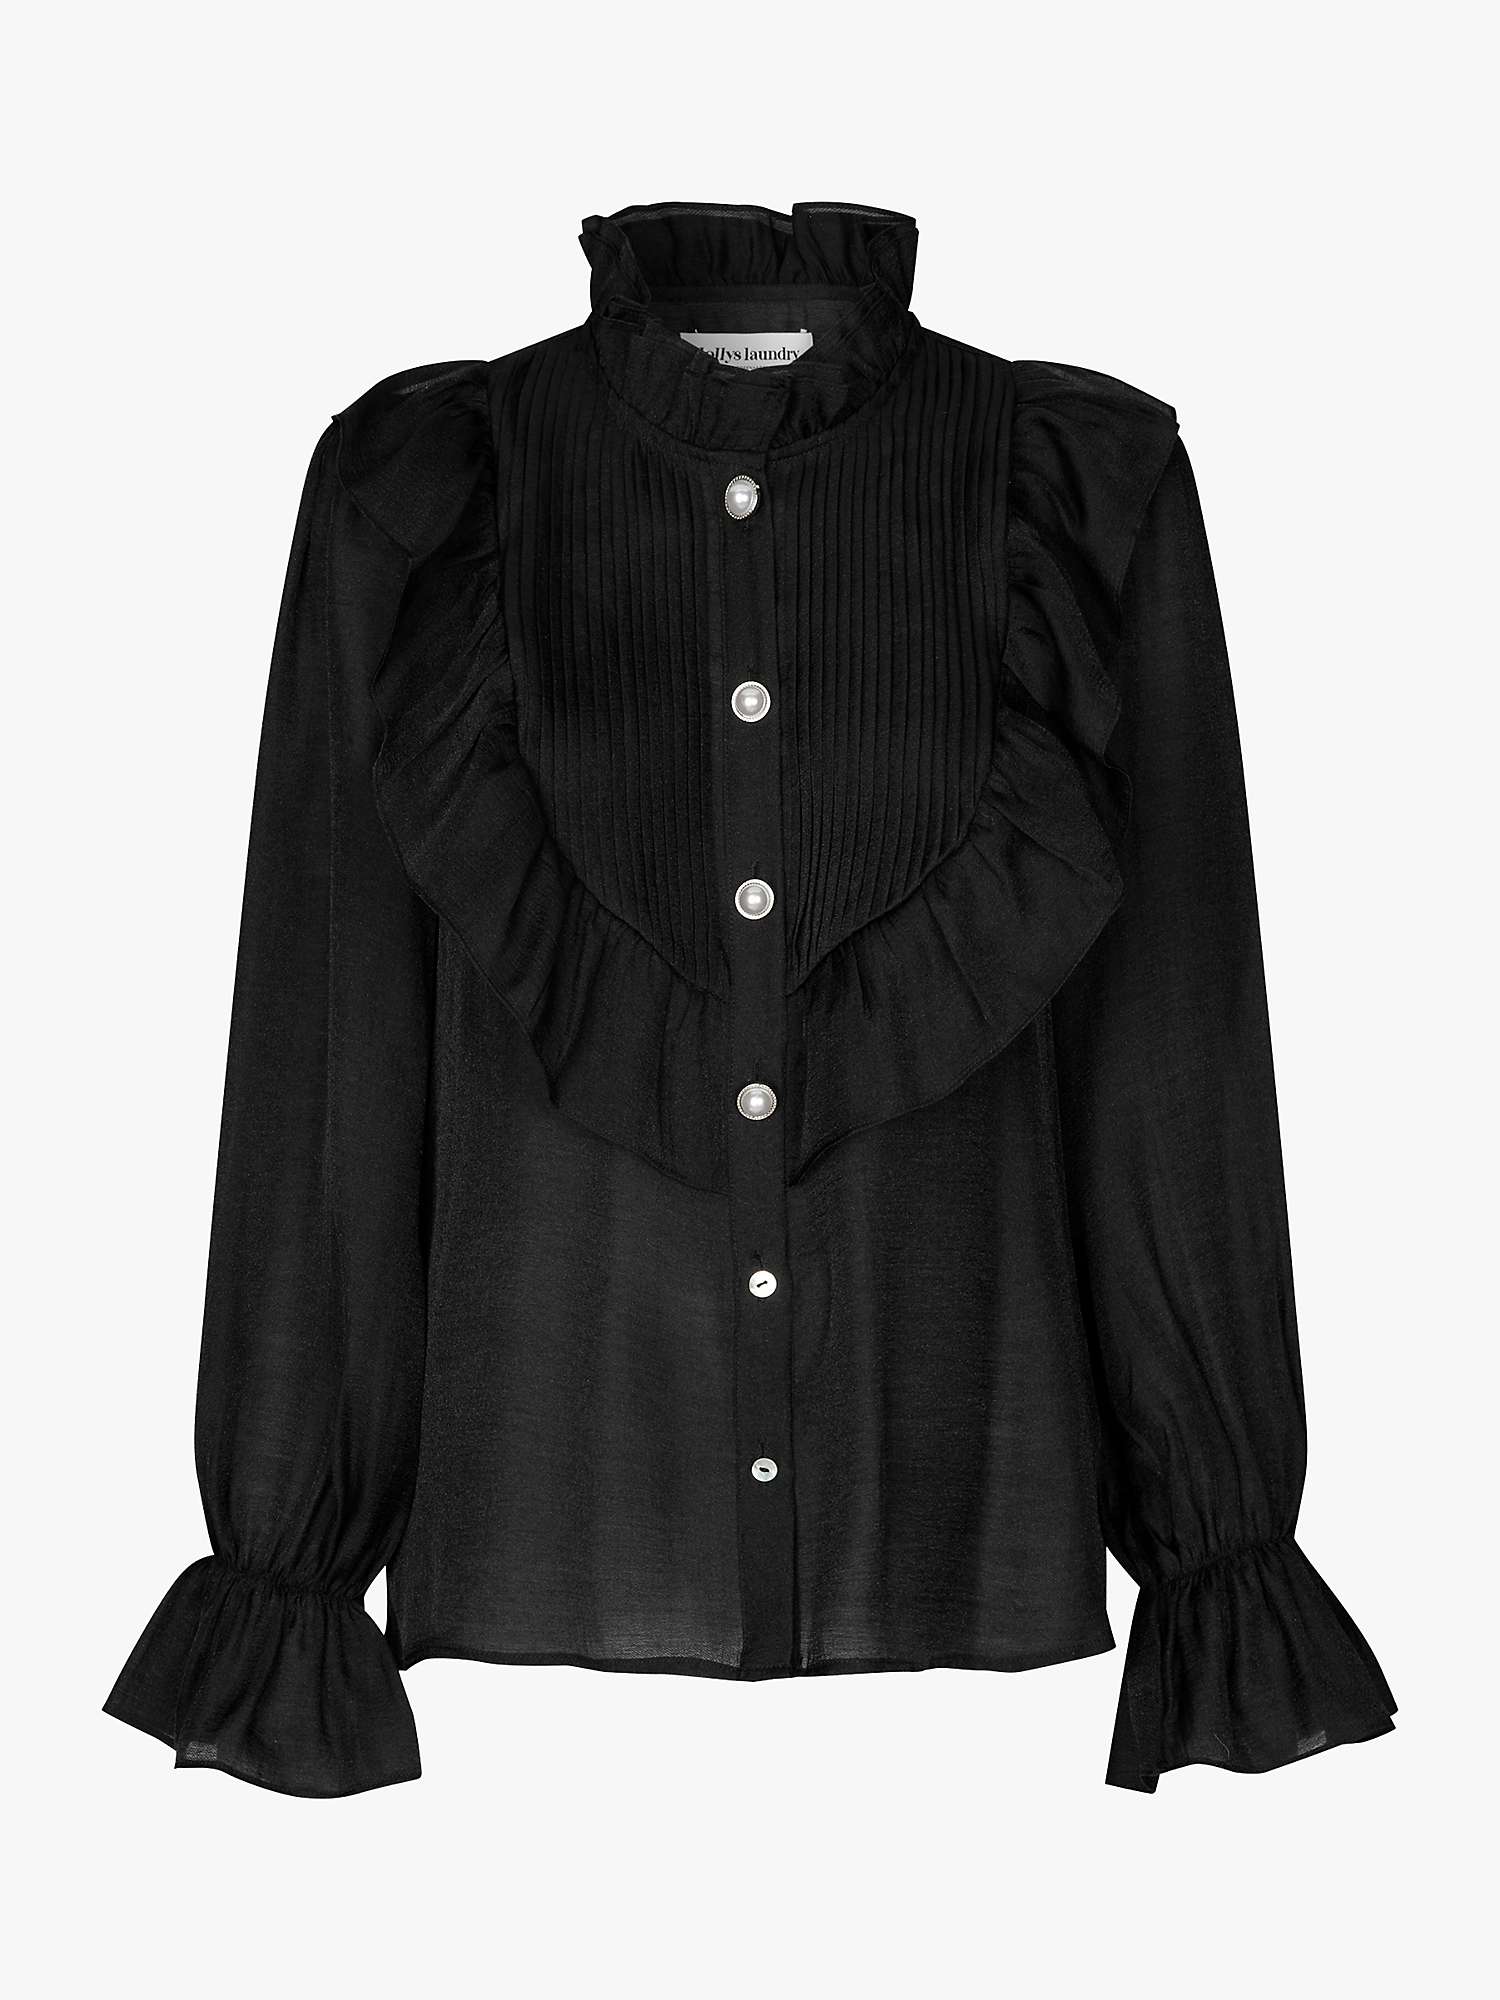 Buy Lollys Laundry Springs Ruffle Placket High Neck Blouse, Black Online at johnlewis.com